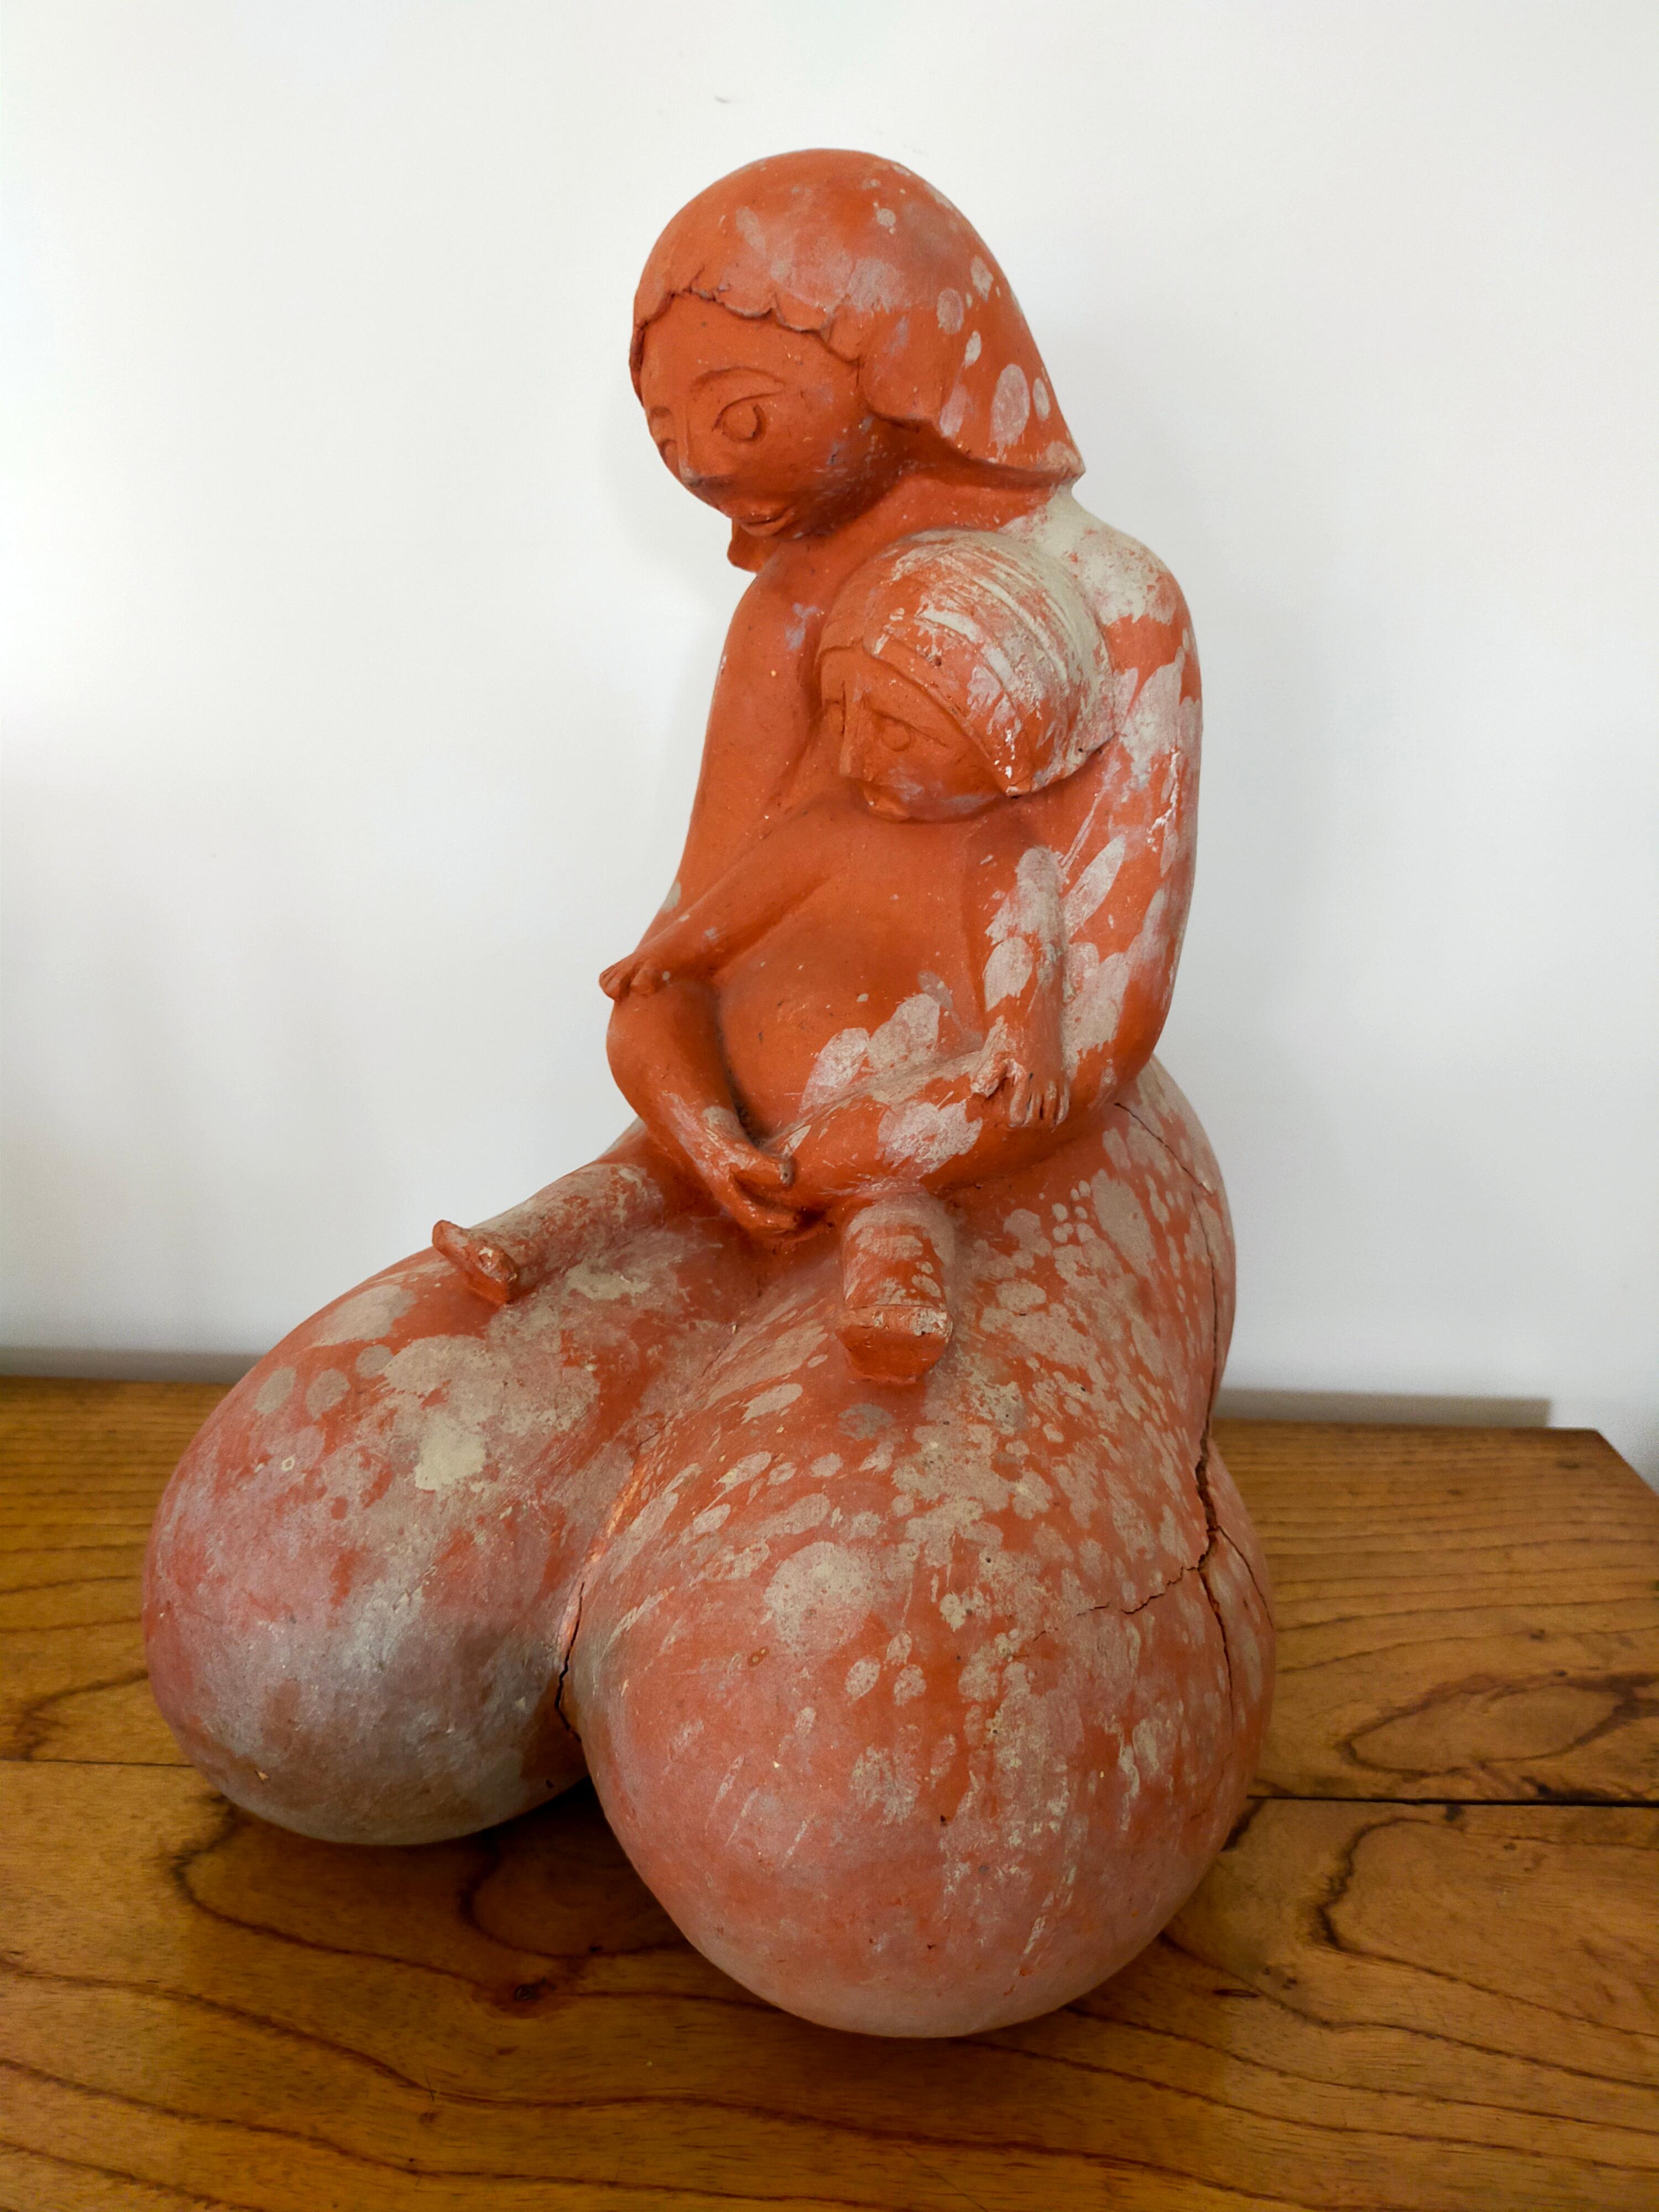 Beautiful woman with child in terra cotta
French work from the 1950s
Terracotta cracked with trace of beige glaze
Unknown artist however work of very great quality.